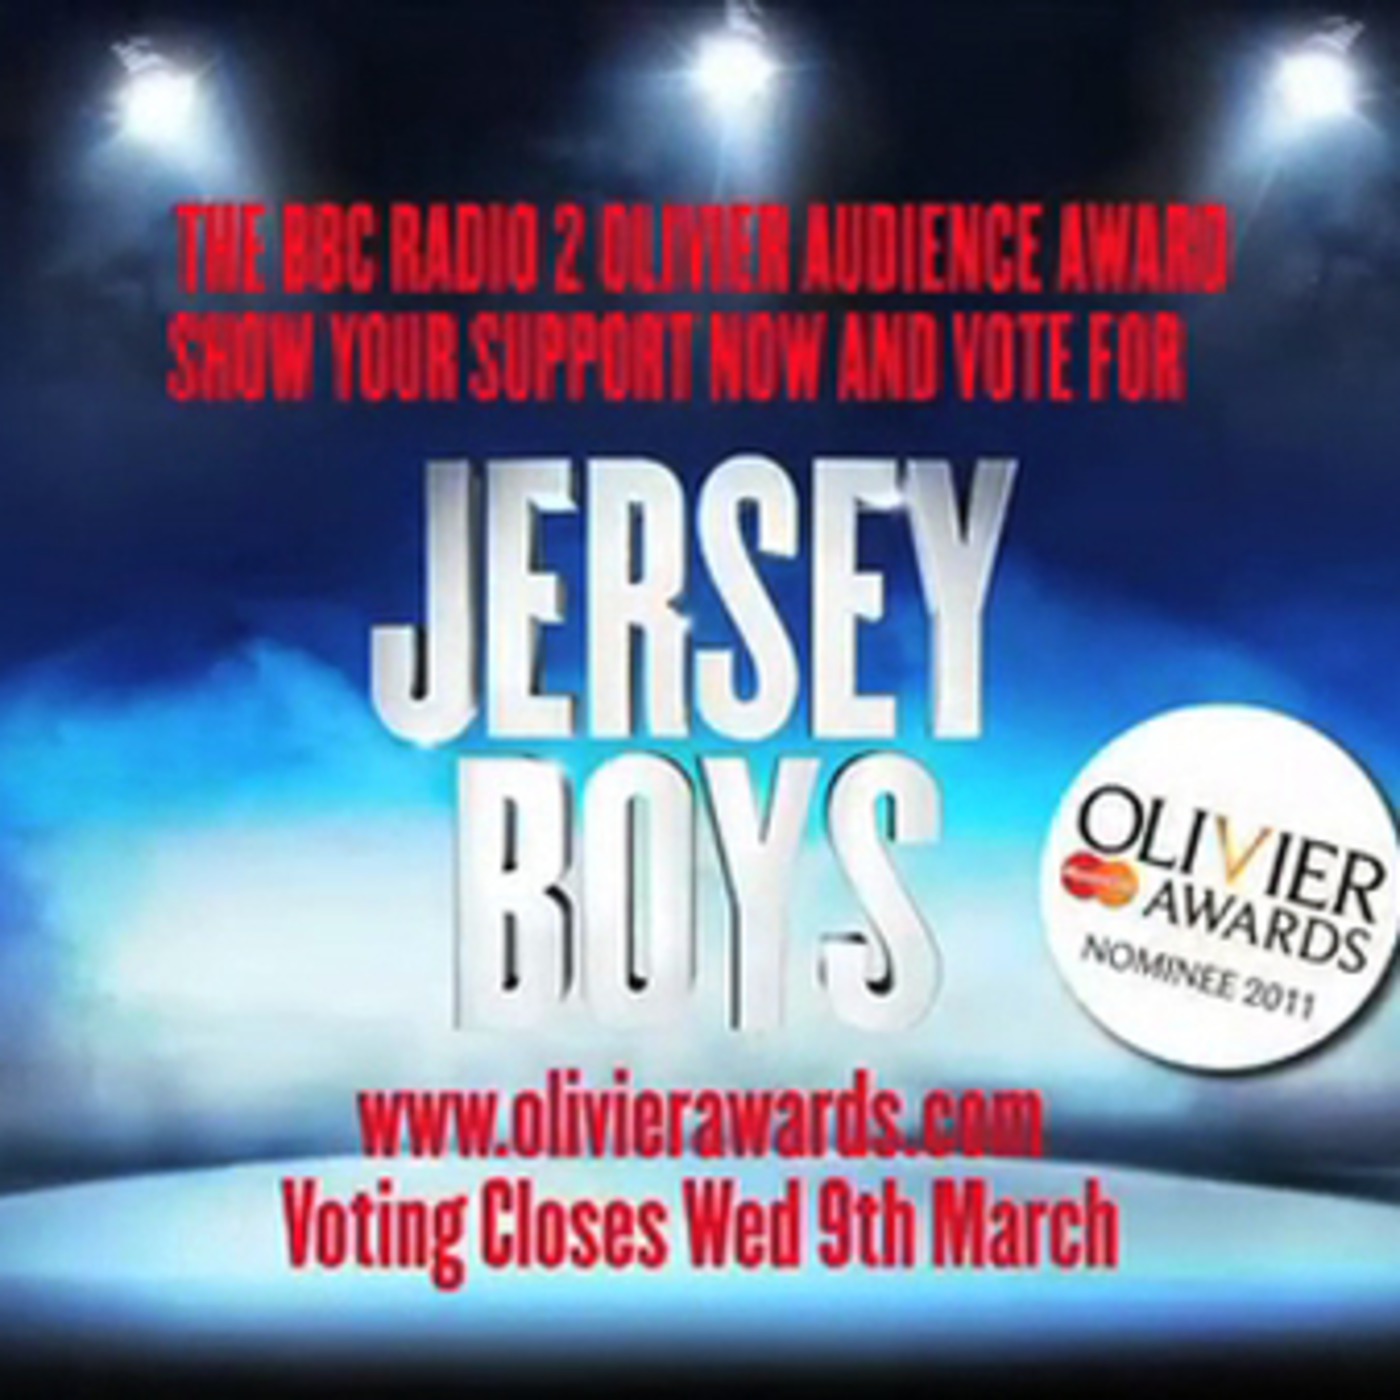 Jersey Boys needs your vote!